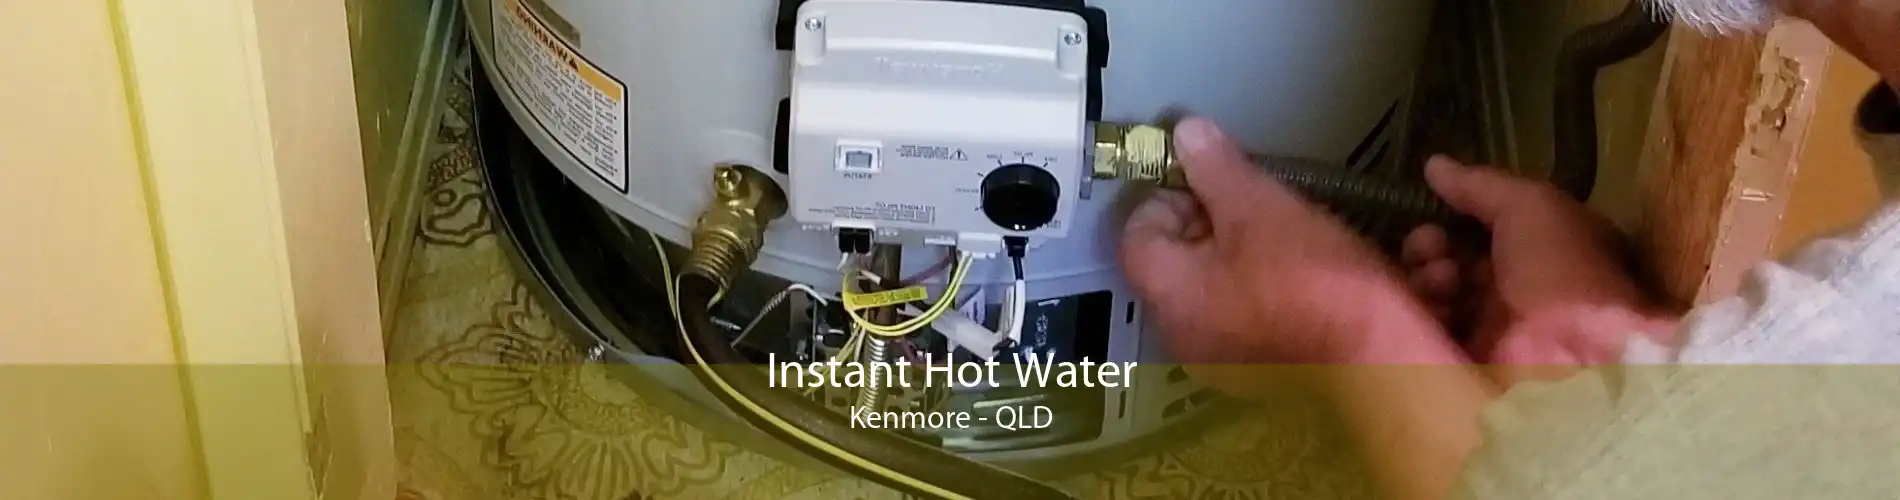 Instant Hot Water Kenmore - QLD